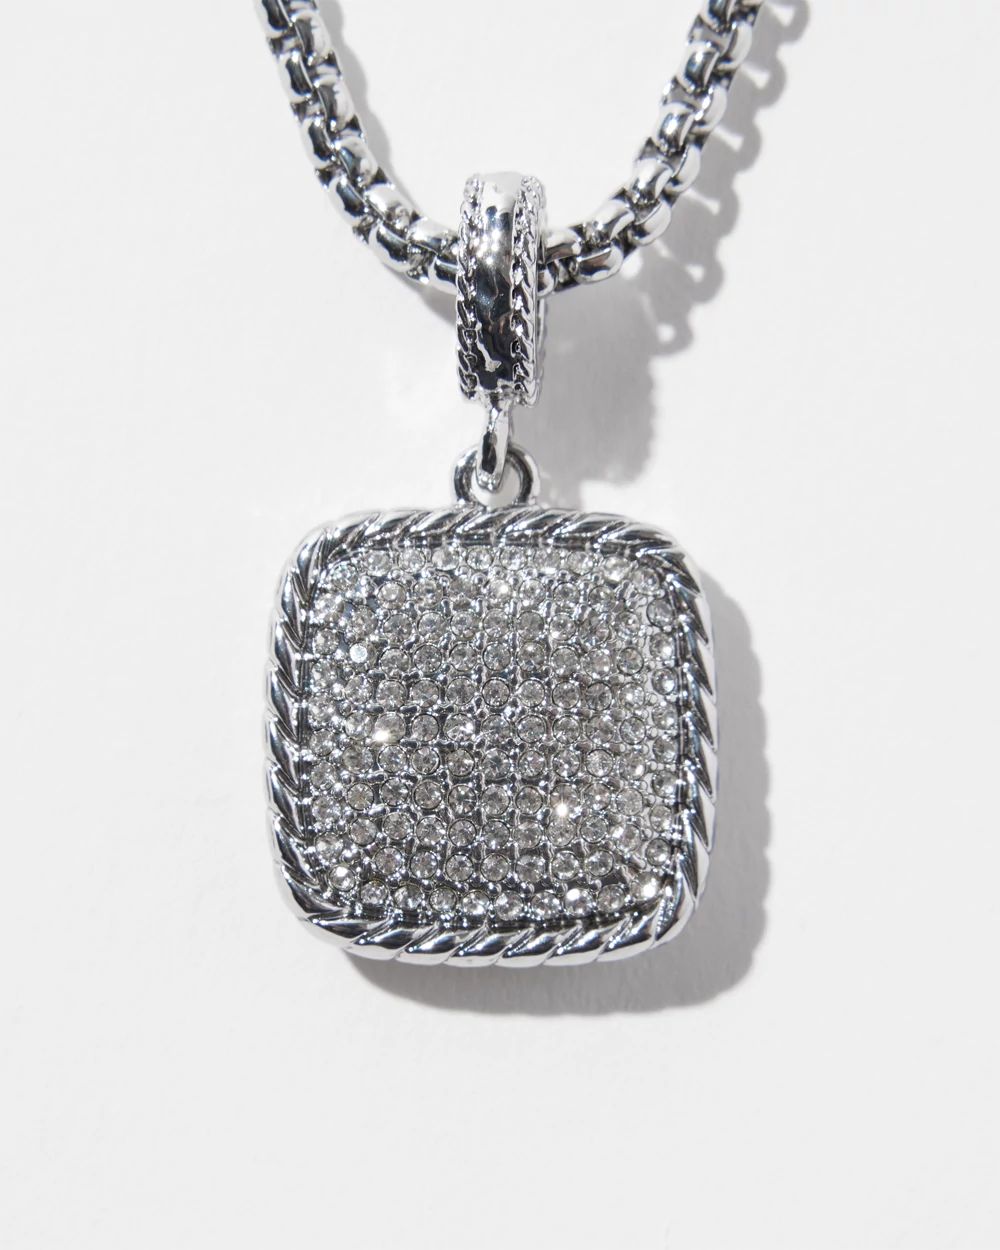 Silver Pave Square Pendant Necklace click to view larger image.